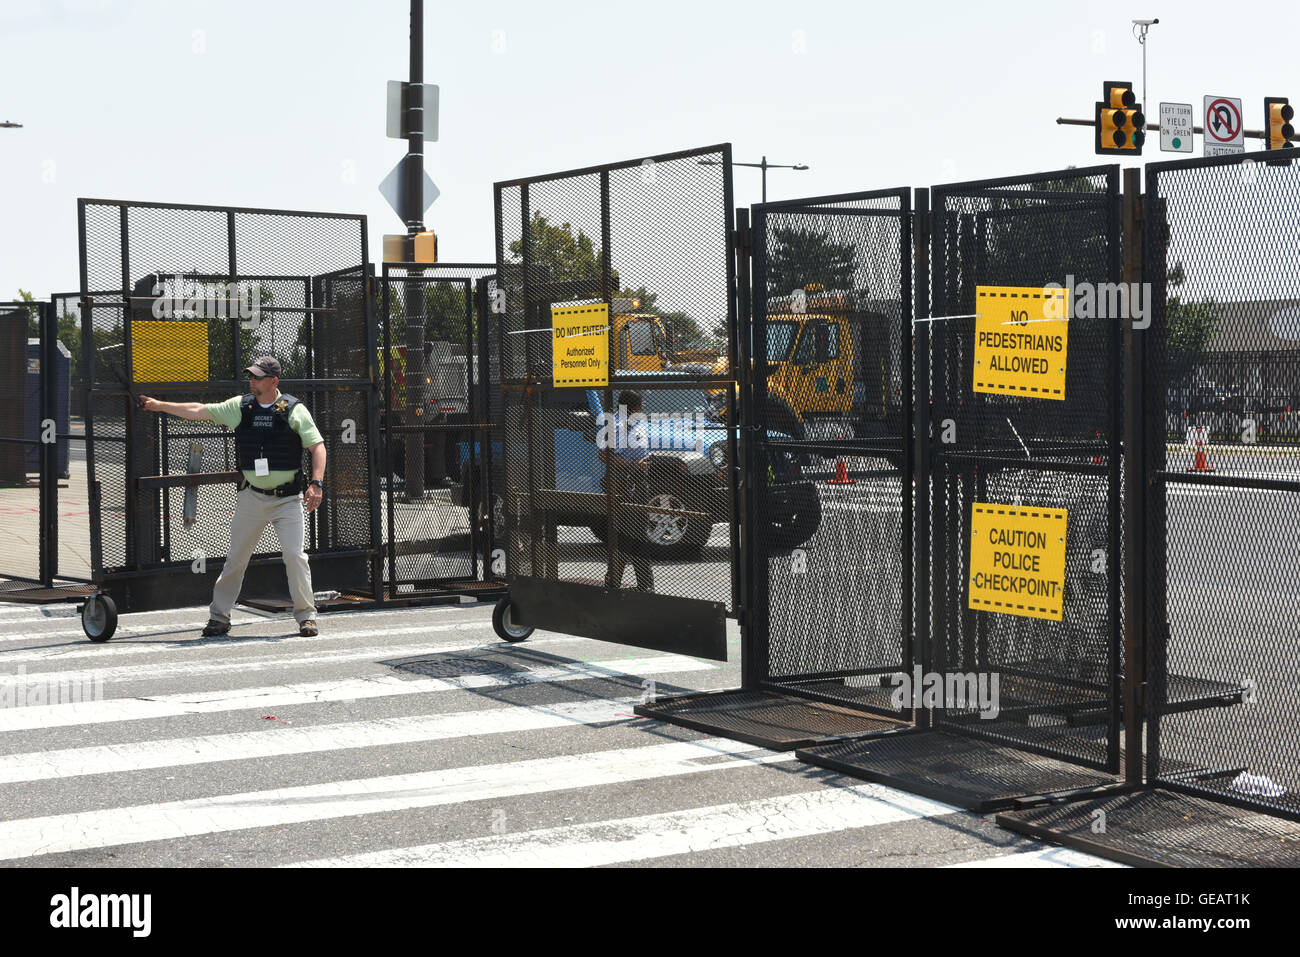 Police checkpoint usa hi-res photography stock - Alamy images and